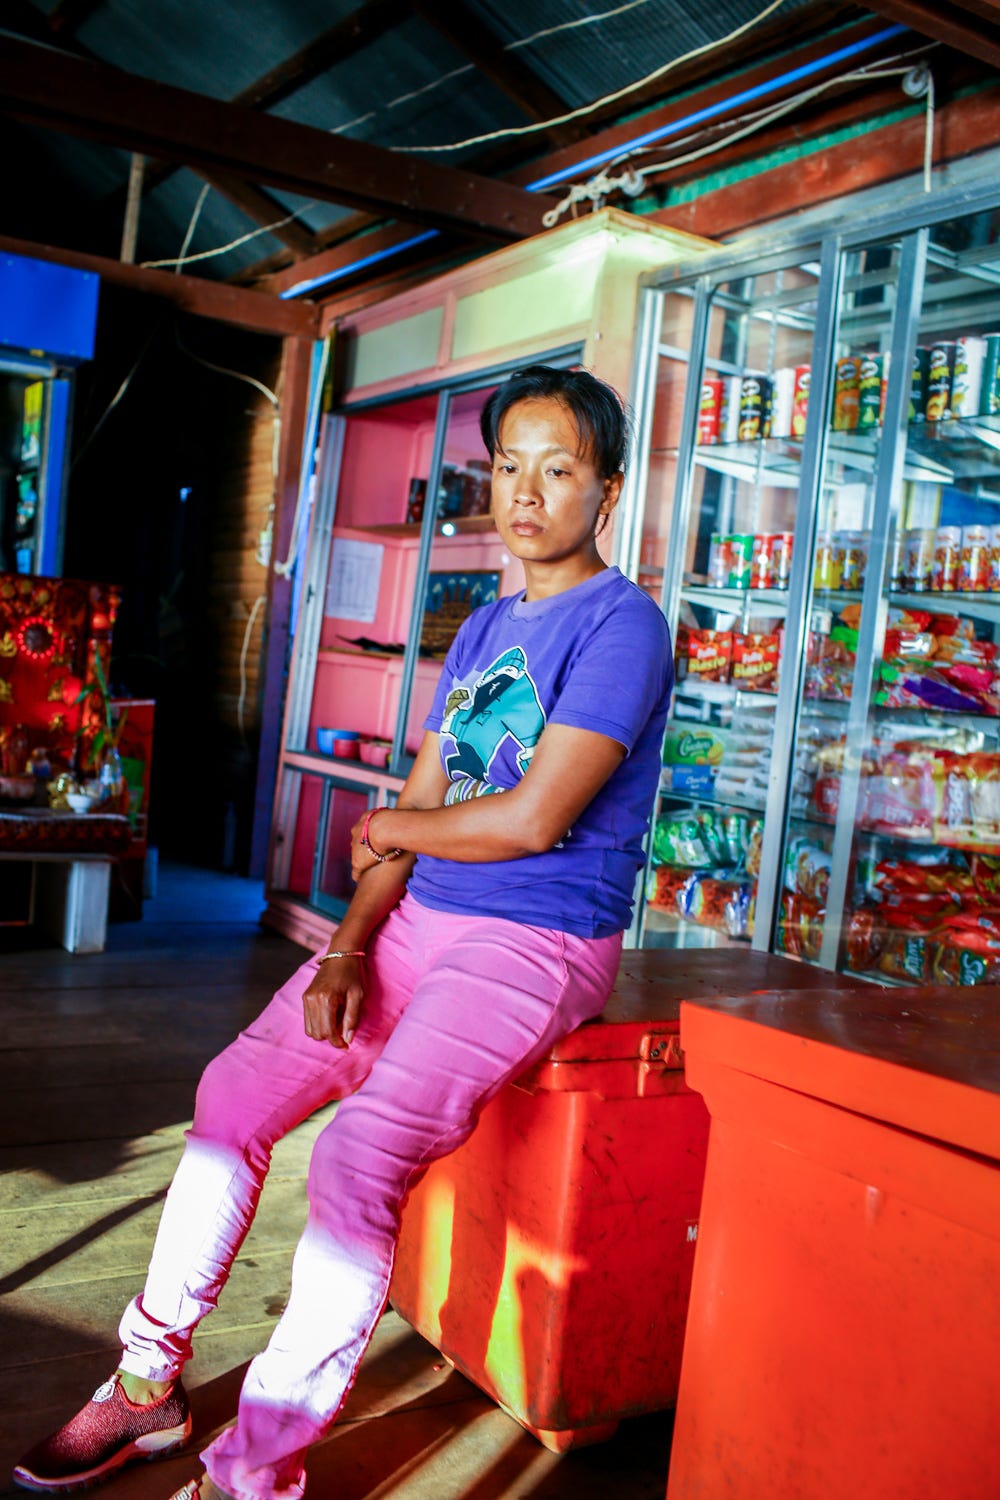 A woman in a purple t-shirt and pink pants looks extremely bored, sitting on a red cooler box in front of a glass cabinet filled with snacks. 